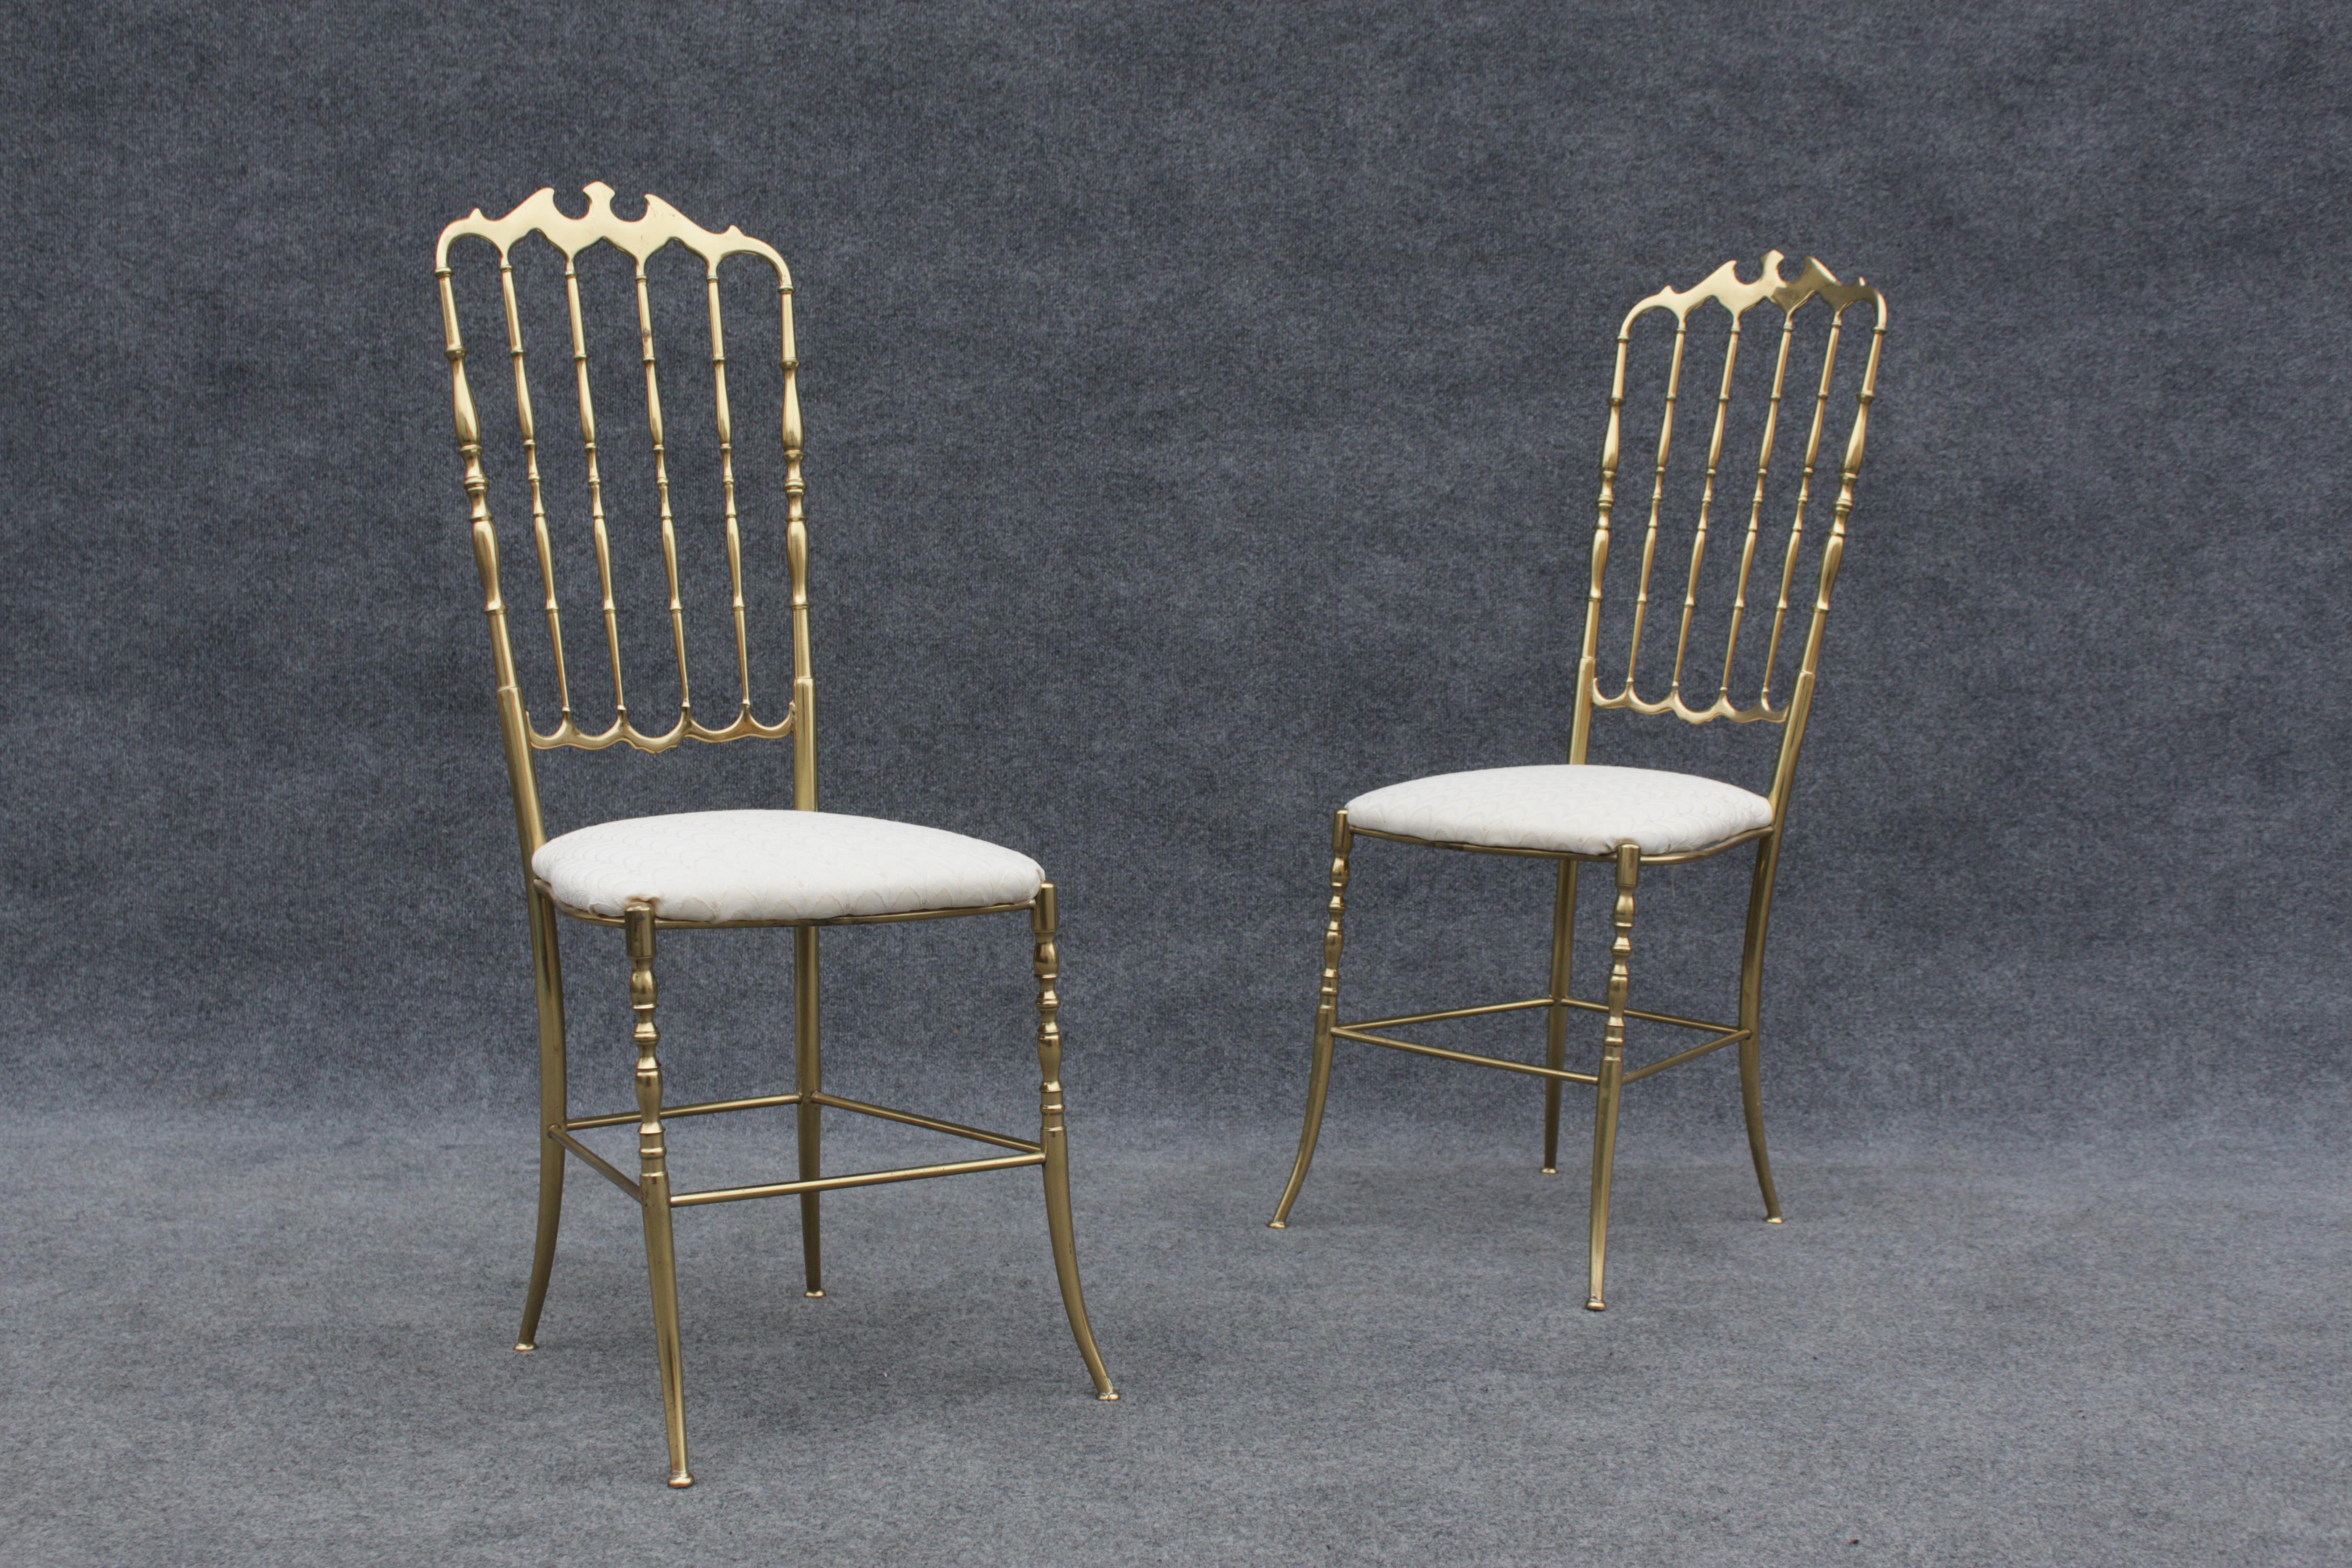 Pair of Solid Brass & White Upholstered Dining or Side Chairs by Chiavari Italy For Sale 7